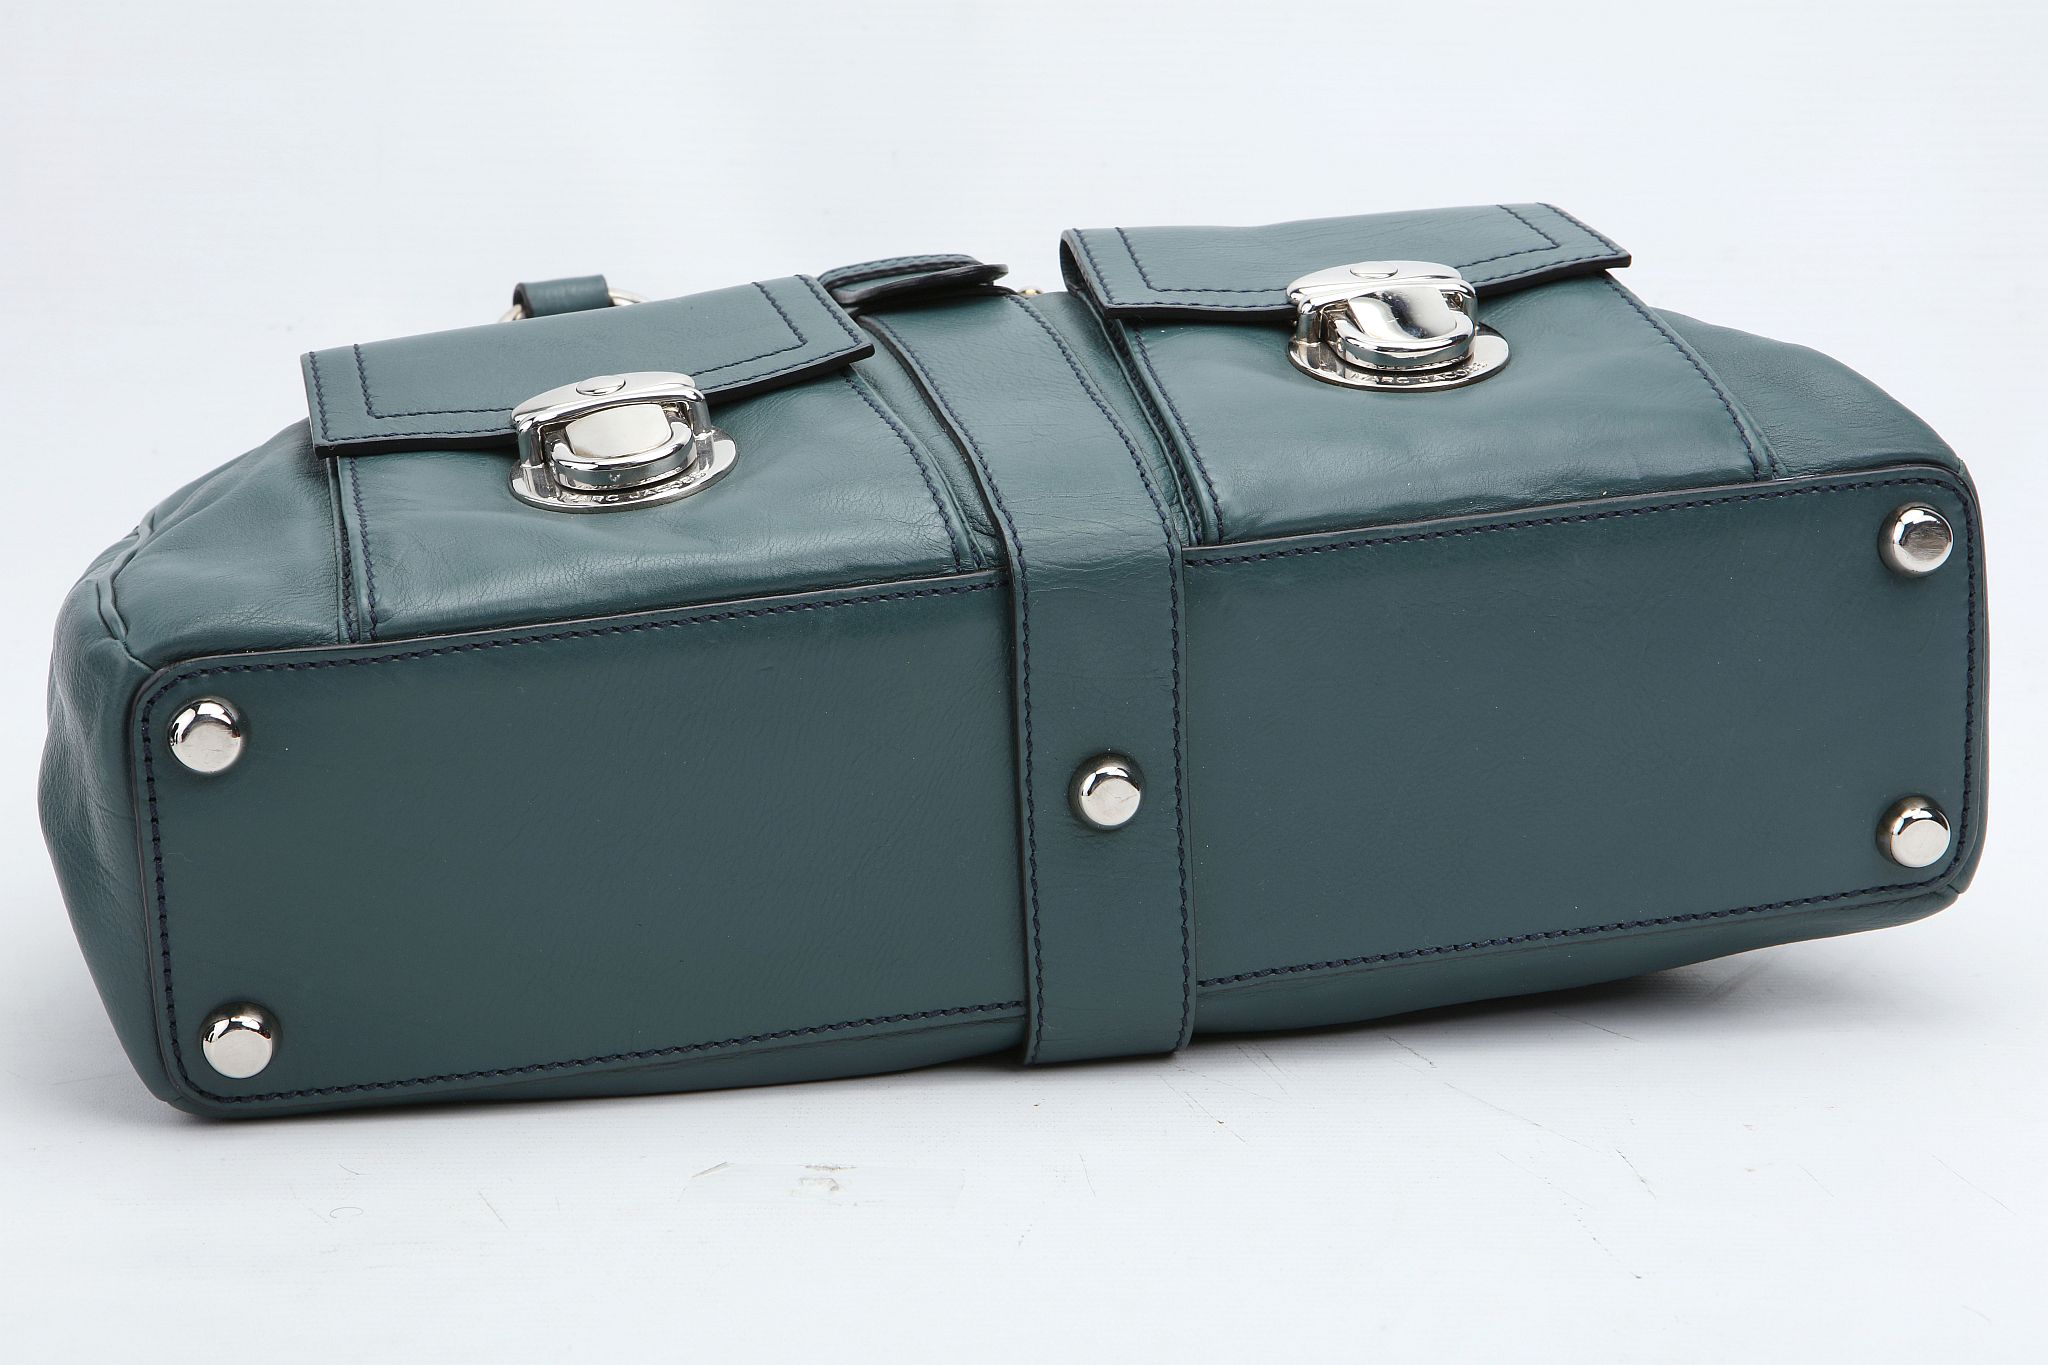 MARC JACOBS VENETIA HANDBAG, teal leather with silver hardware, 38cm wide, 23cm high, with dust bag - Image 5 of 12